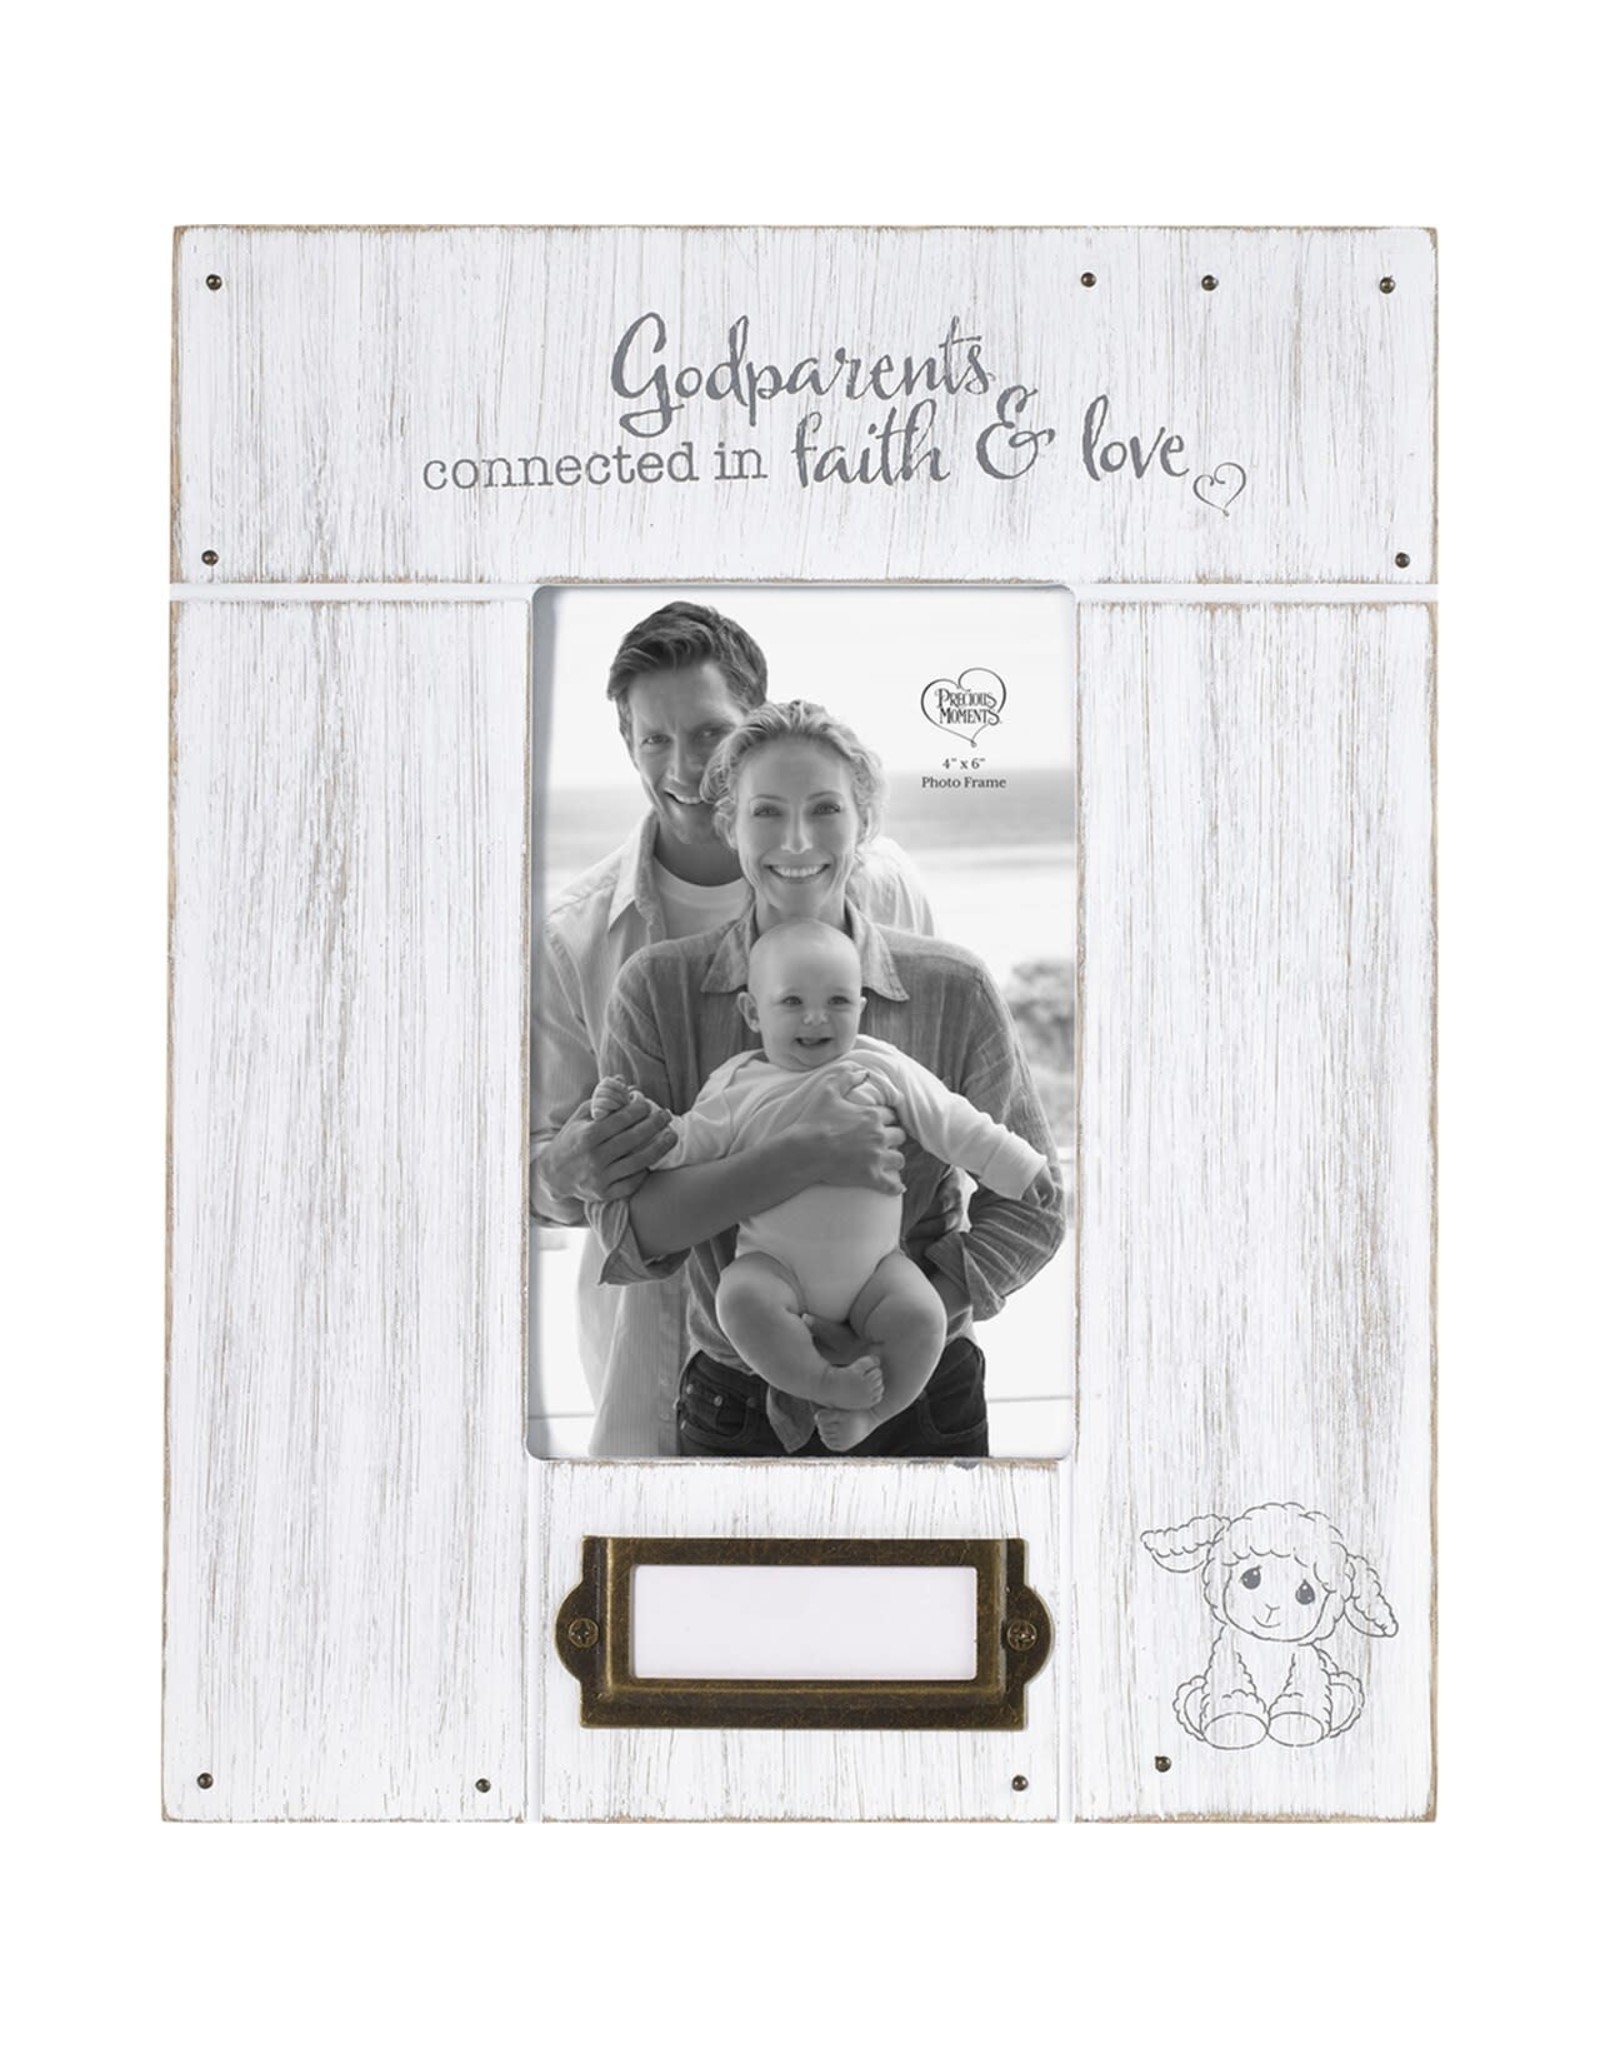 Precious Moments Godparents, Connected In Faith And Love Photo Frame